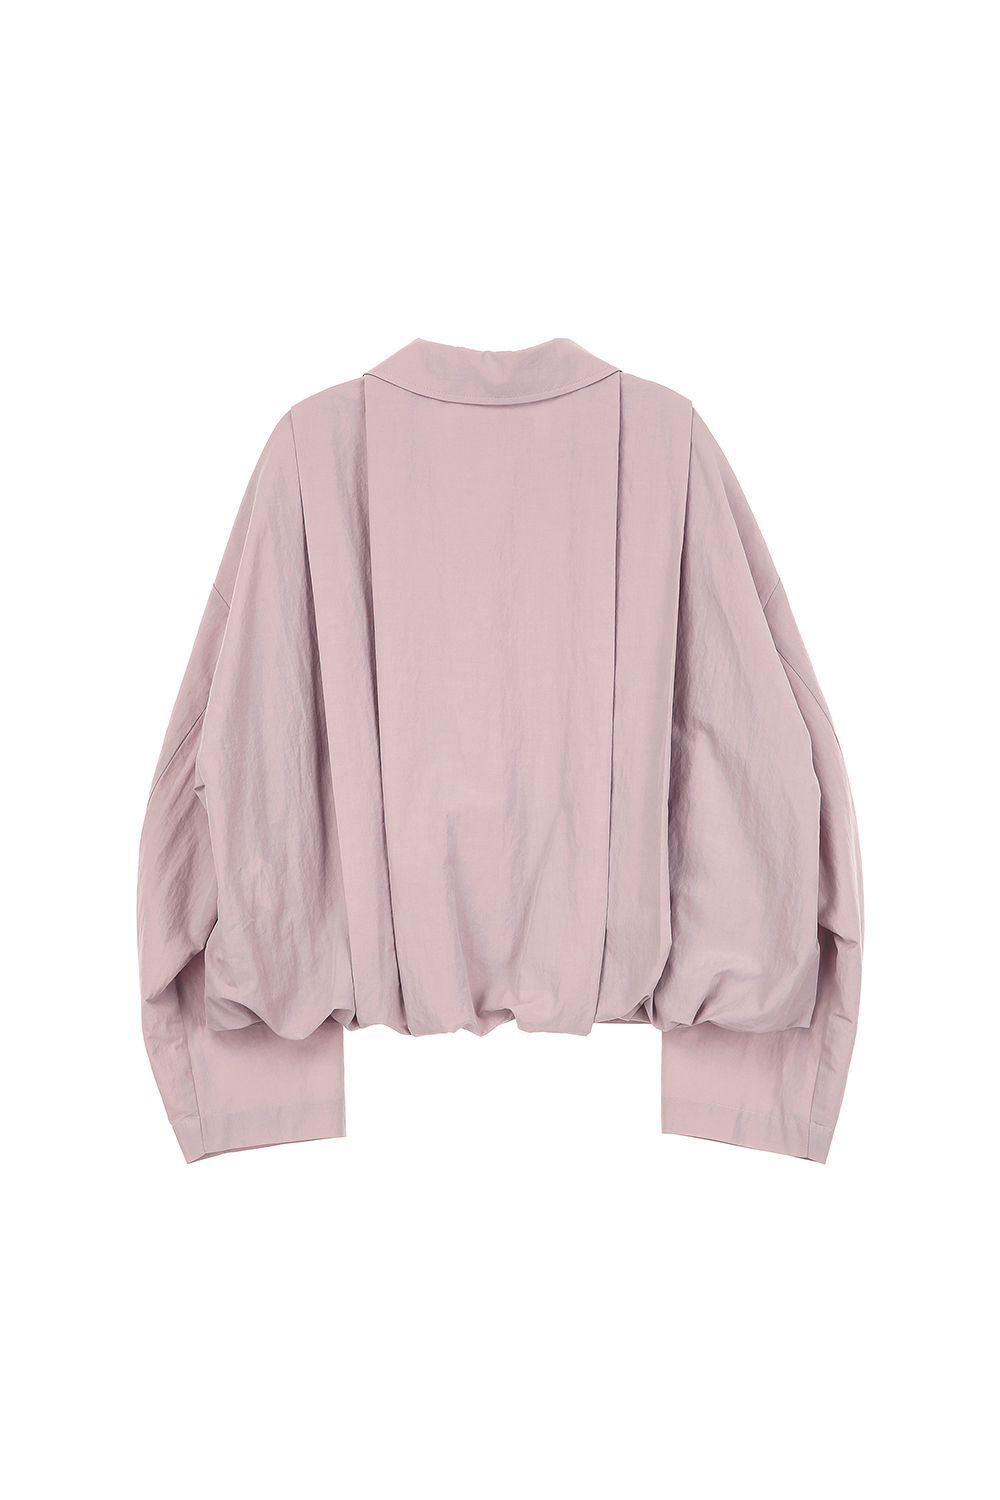 blouse baby pink color image-S1L15